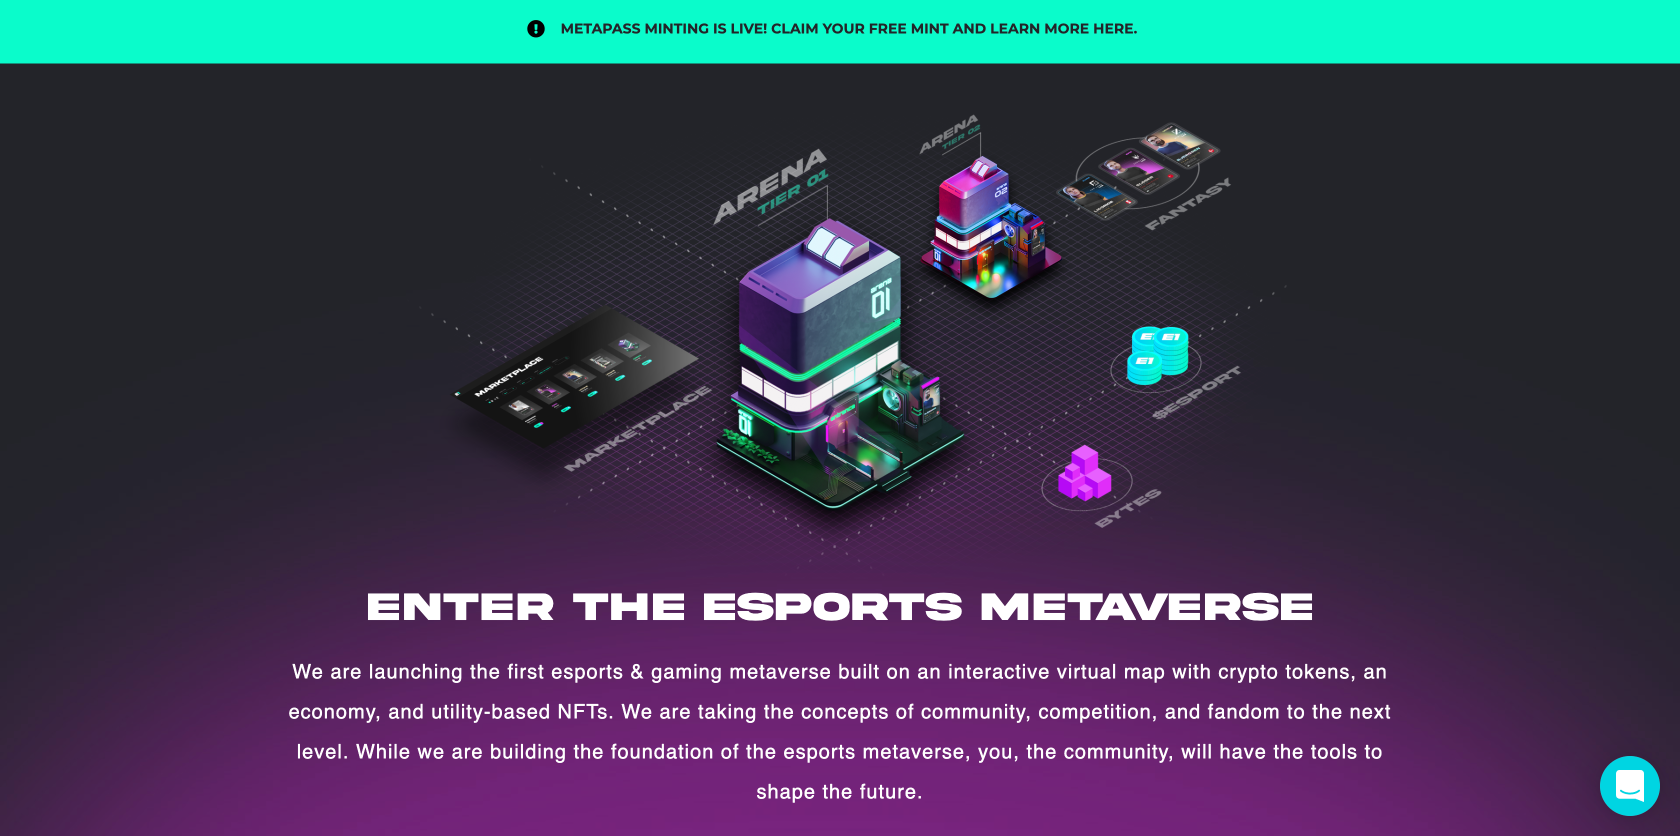 EsportsOne opens a free mint for access card NFTs into an esports metaverse